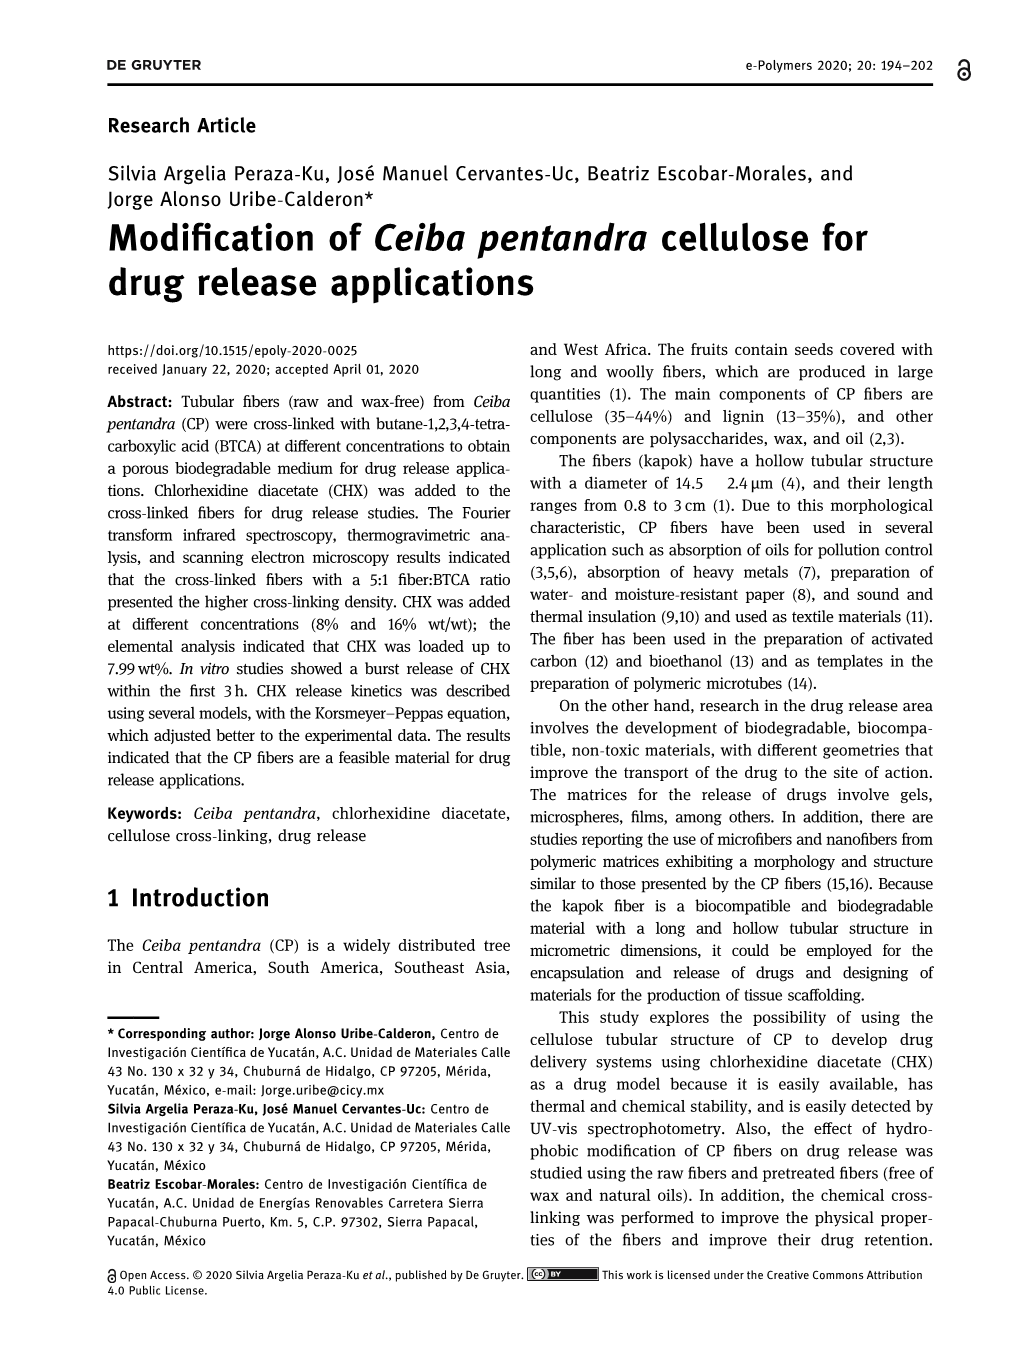 Modification of Ceiba Pentandra Cellulose for Drug Release Applications